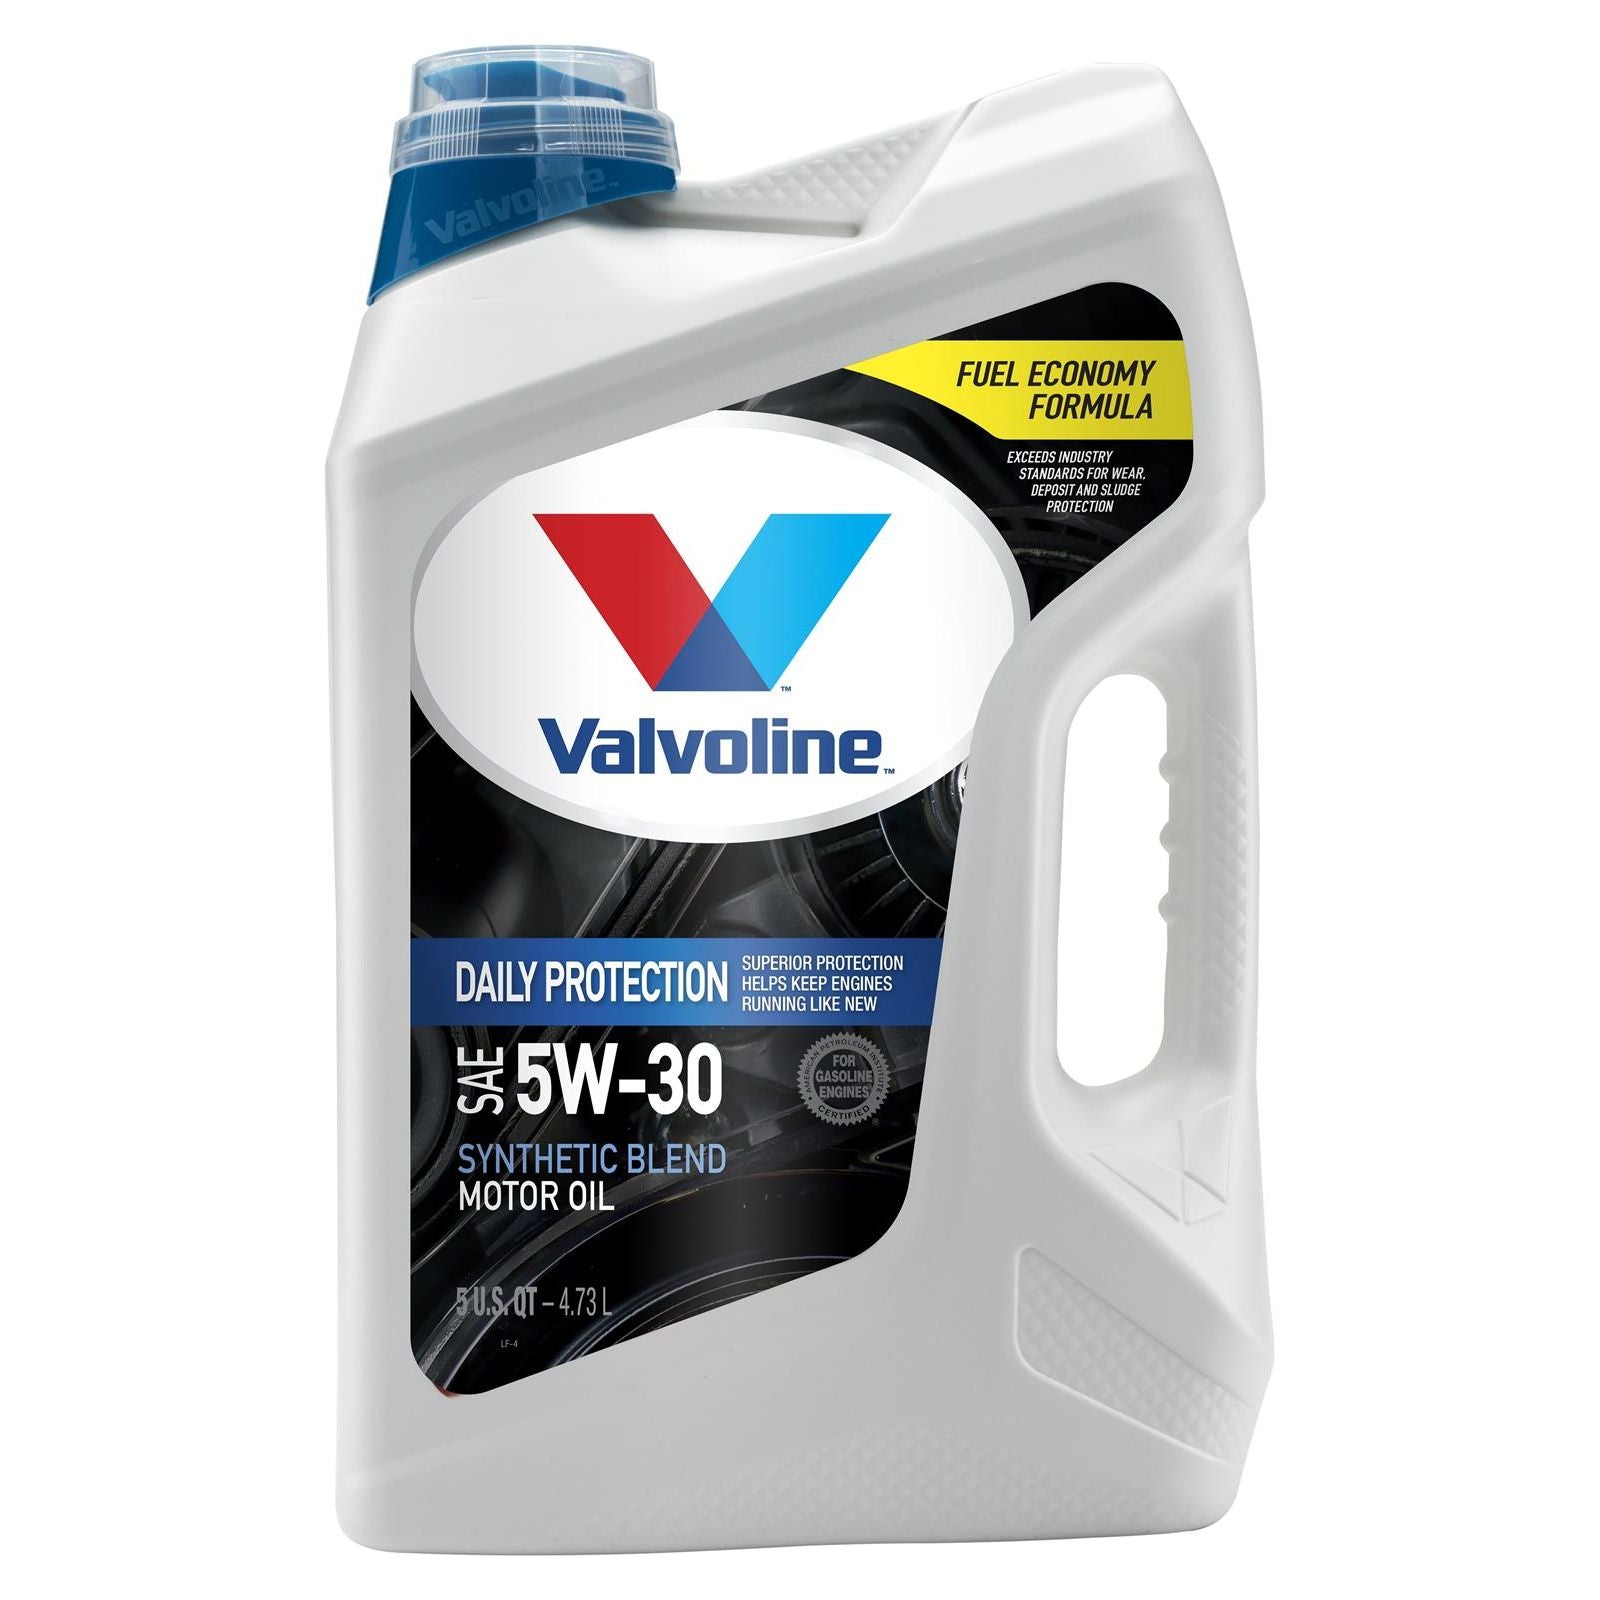 Valvoline Daily Protection Standard Synthetic Blend Engine Oil 5W-30 5 Quart 881159